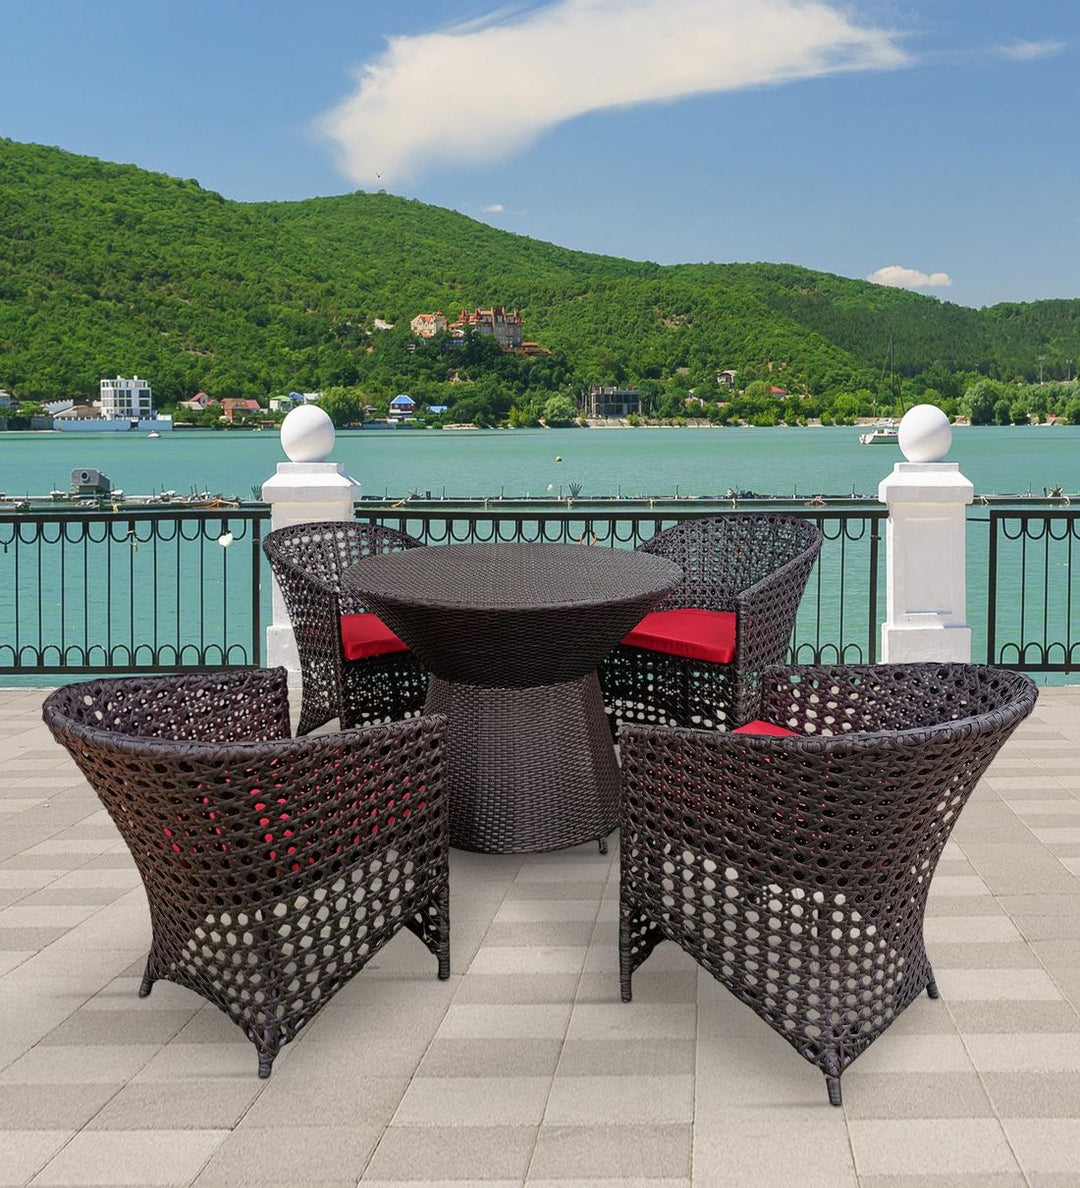 Dreamline Outdoor Furniture Garden Patio Seating Set 1+4 4 Chairs and Table Set Balcony Furniture Coffee Table Set (Brown)